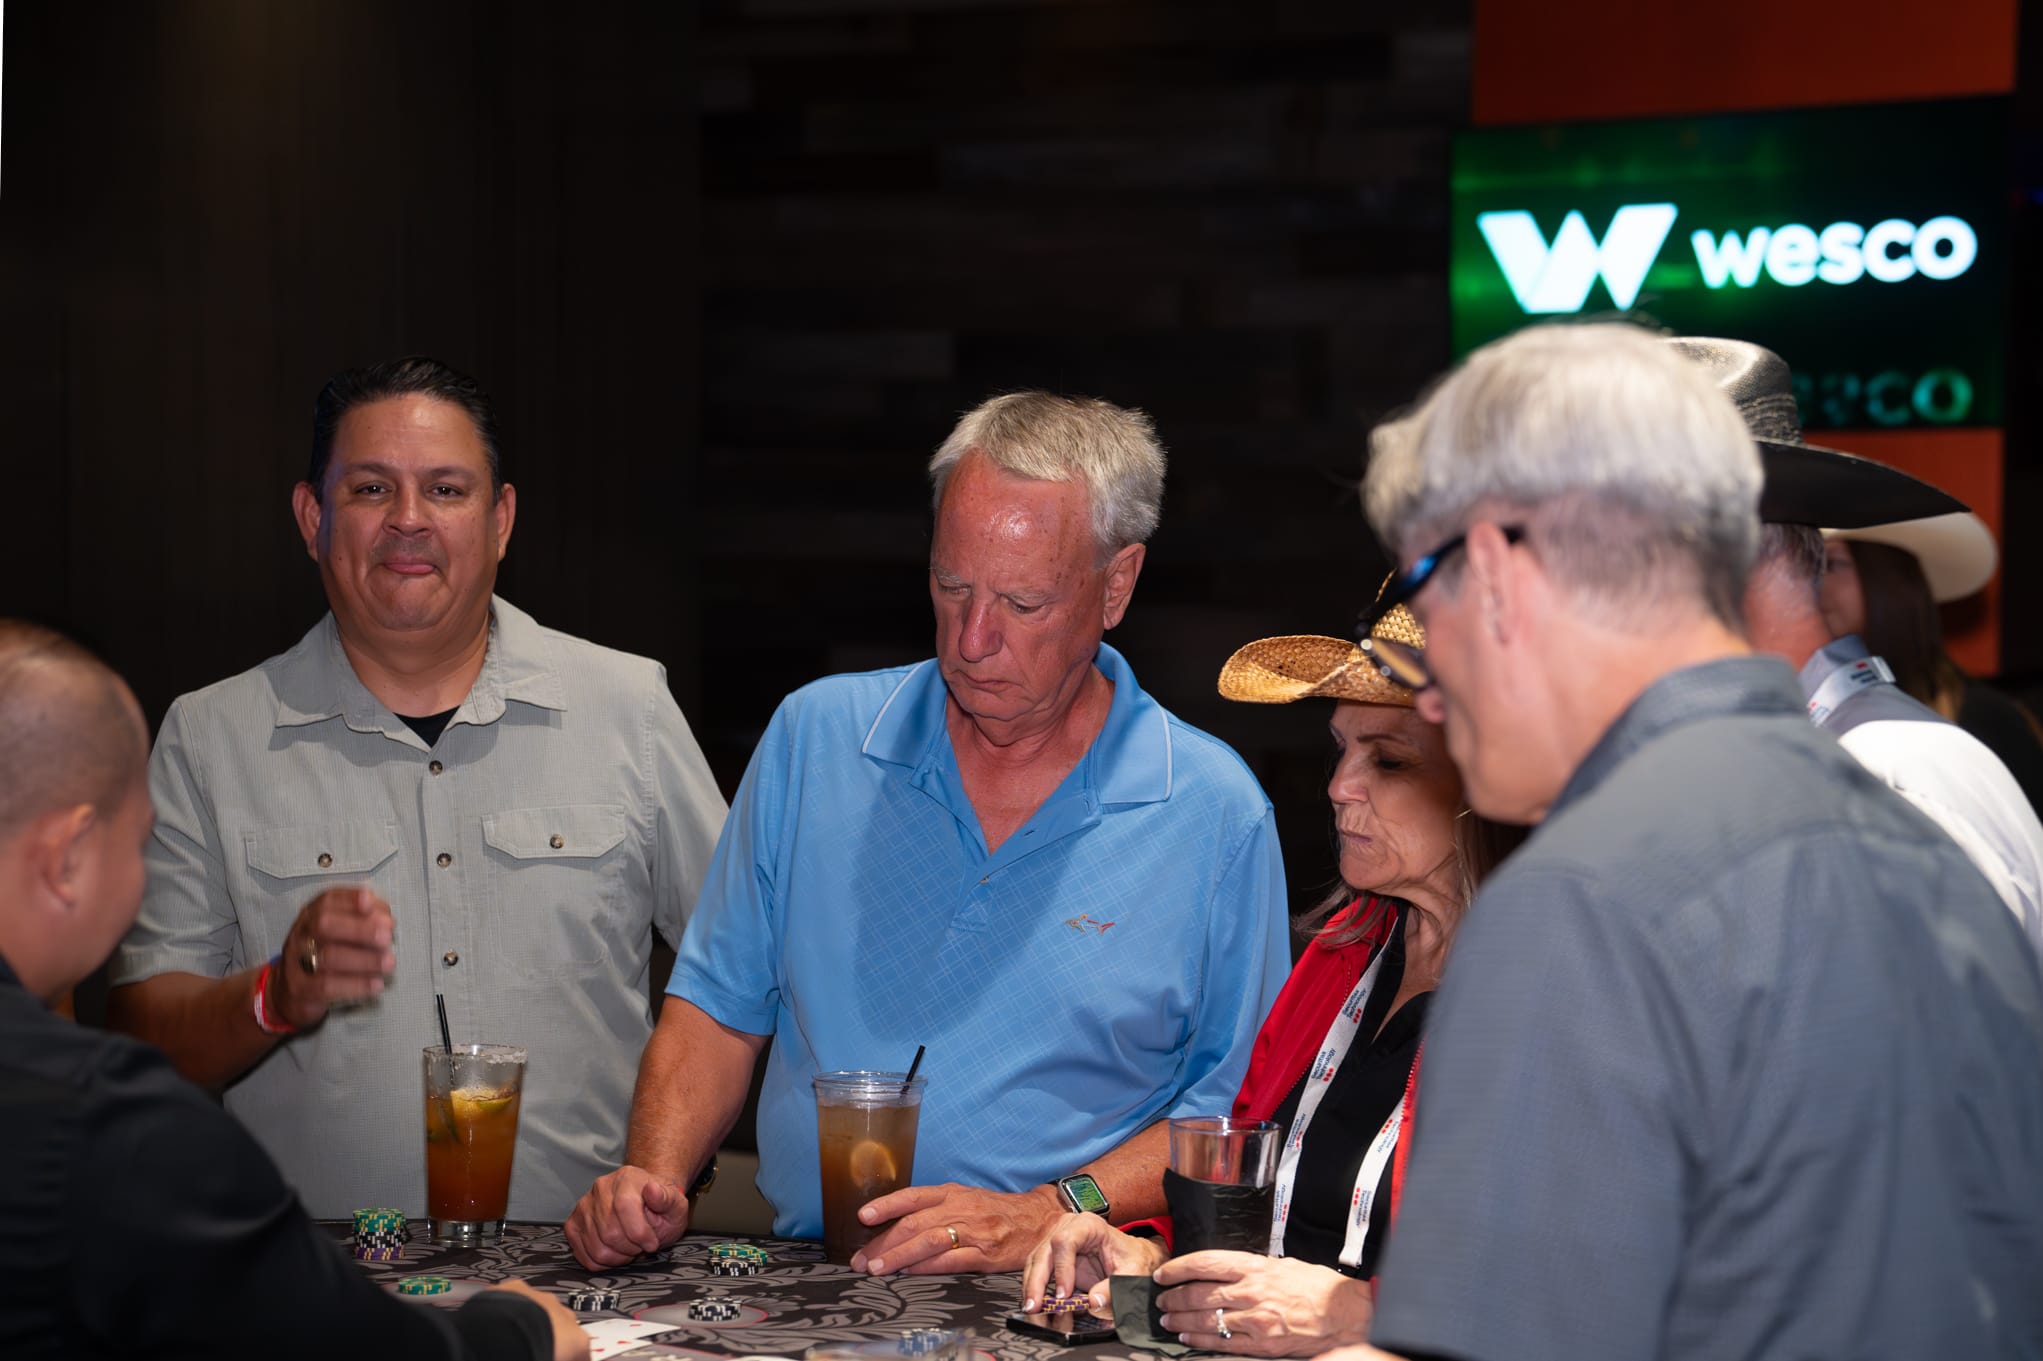 Attendees of Security 101 Appreciation Event participate in casino games at Happiest Hour in Dallas, TX